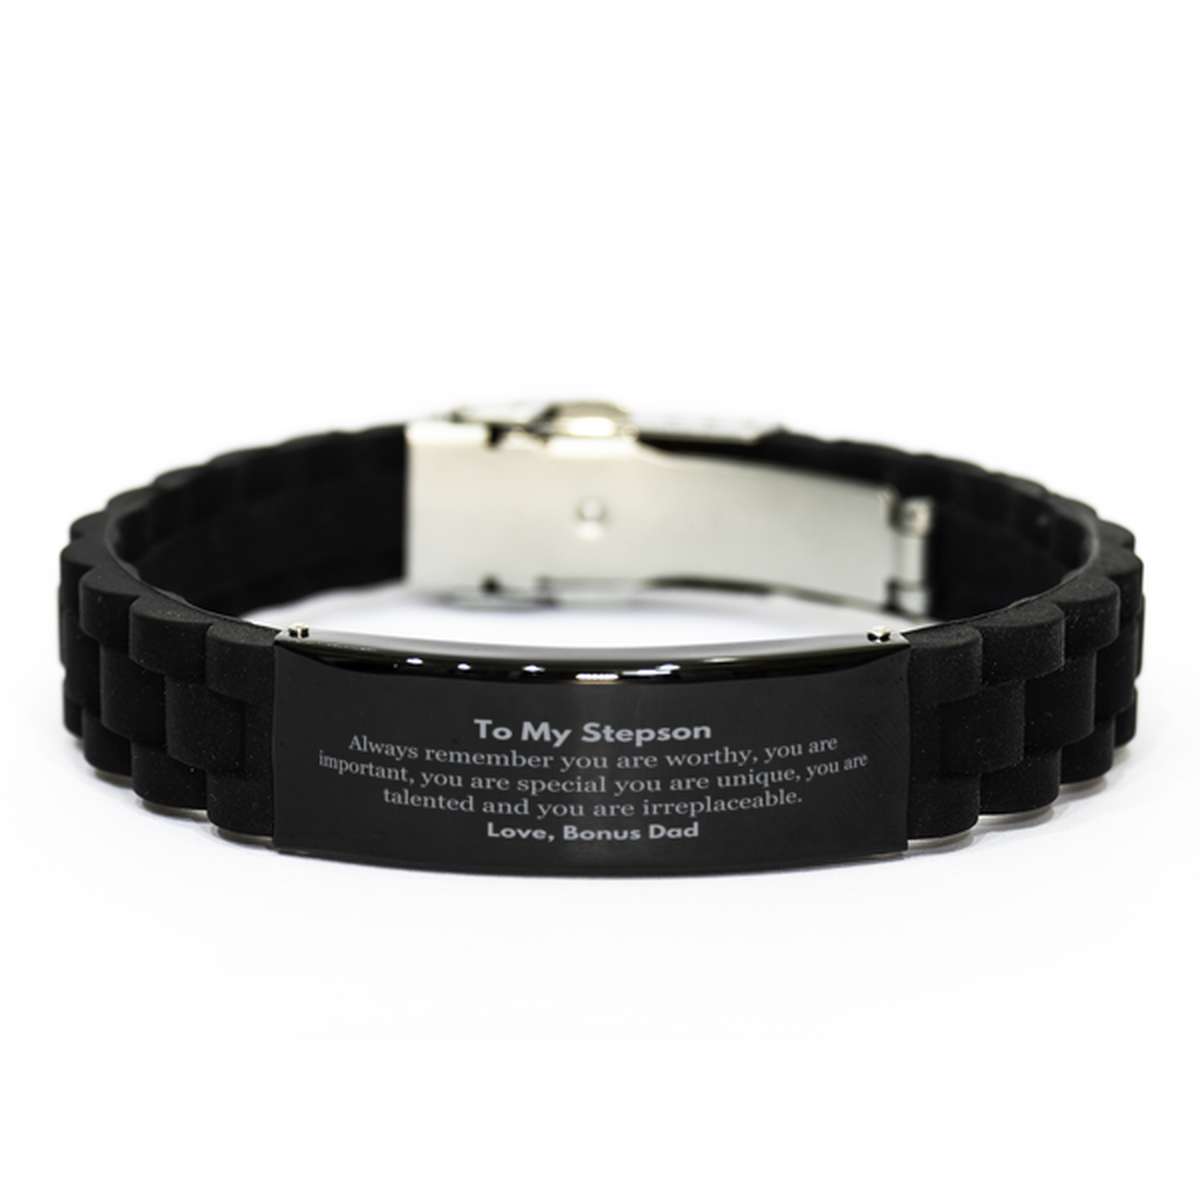 Stepson Birthday Gifts from Bonus Dad, Inspirational Black Glidelock Clasp Bracelet for Stepson Christmas Graduation Gifts for Stepson Always remember you are worthy, you are important. Love, Bonus Dad